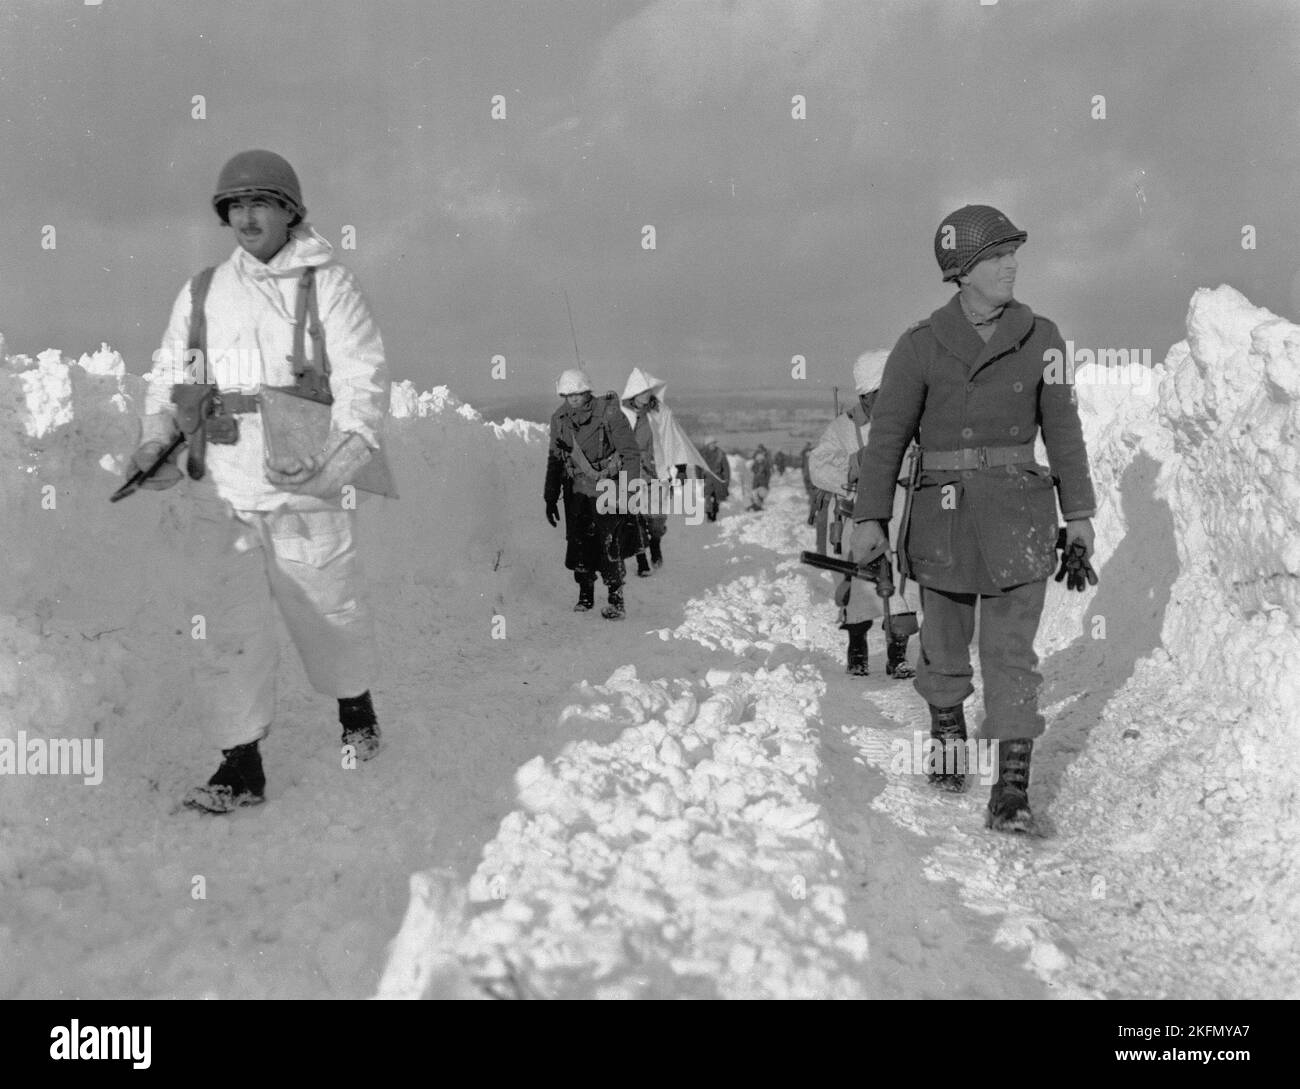 ARDENNES, BELGIUM - December 1944 - US Army soldiers move through the Ardennes region of Belgium during the bloody counter-attack by the Germans in th Stock Photo